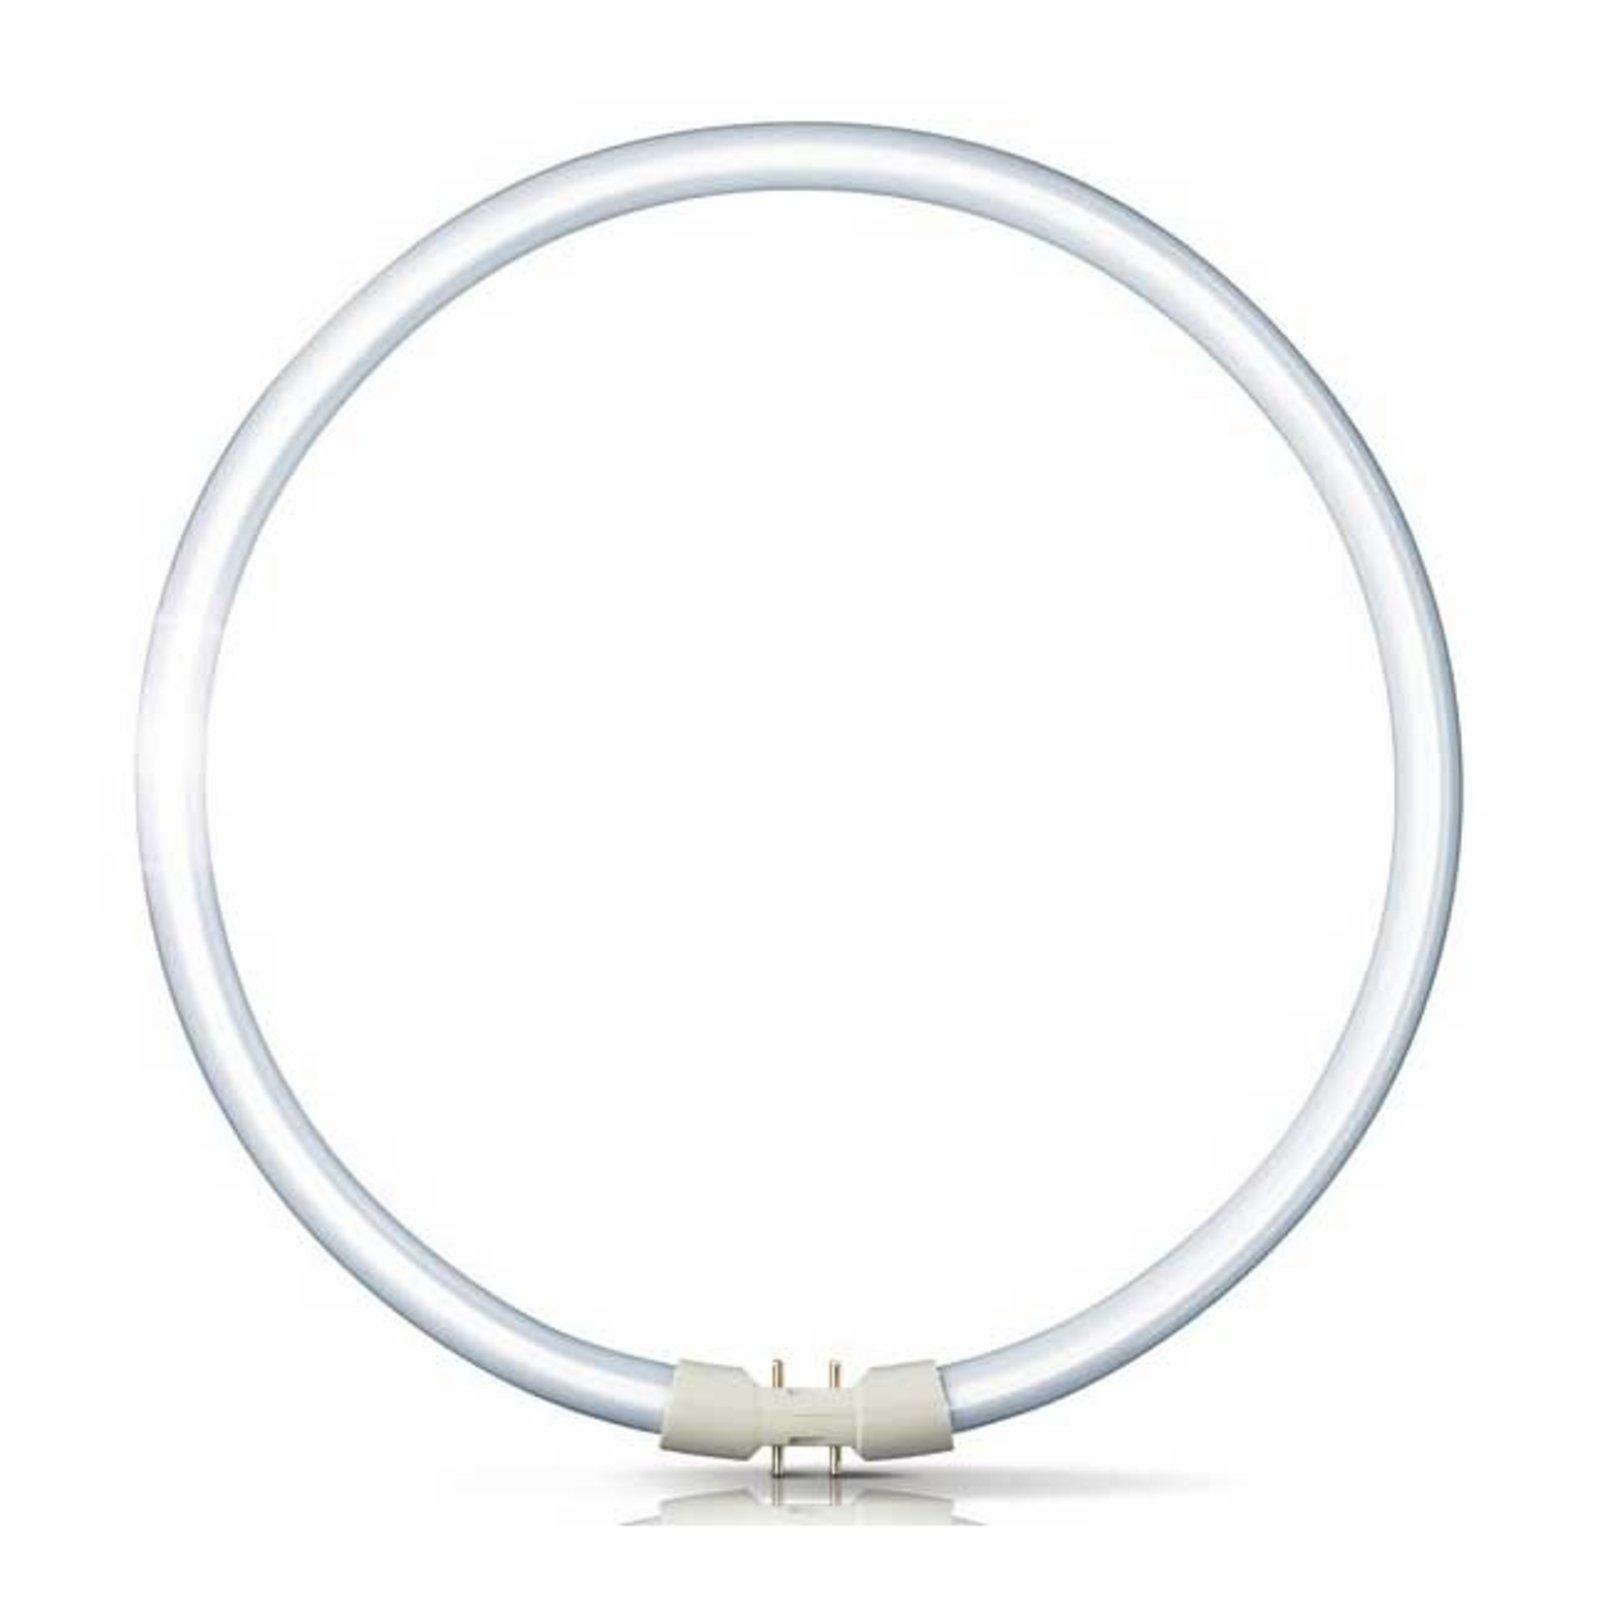 2GX13 60W 840 Ring-Leuchtstofflampe Master TL5